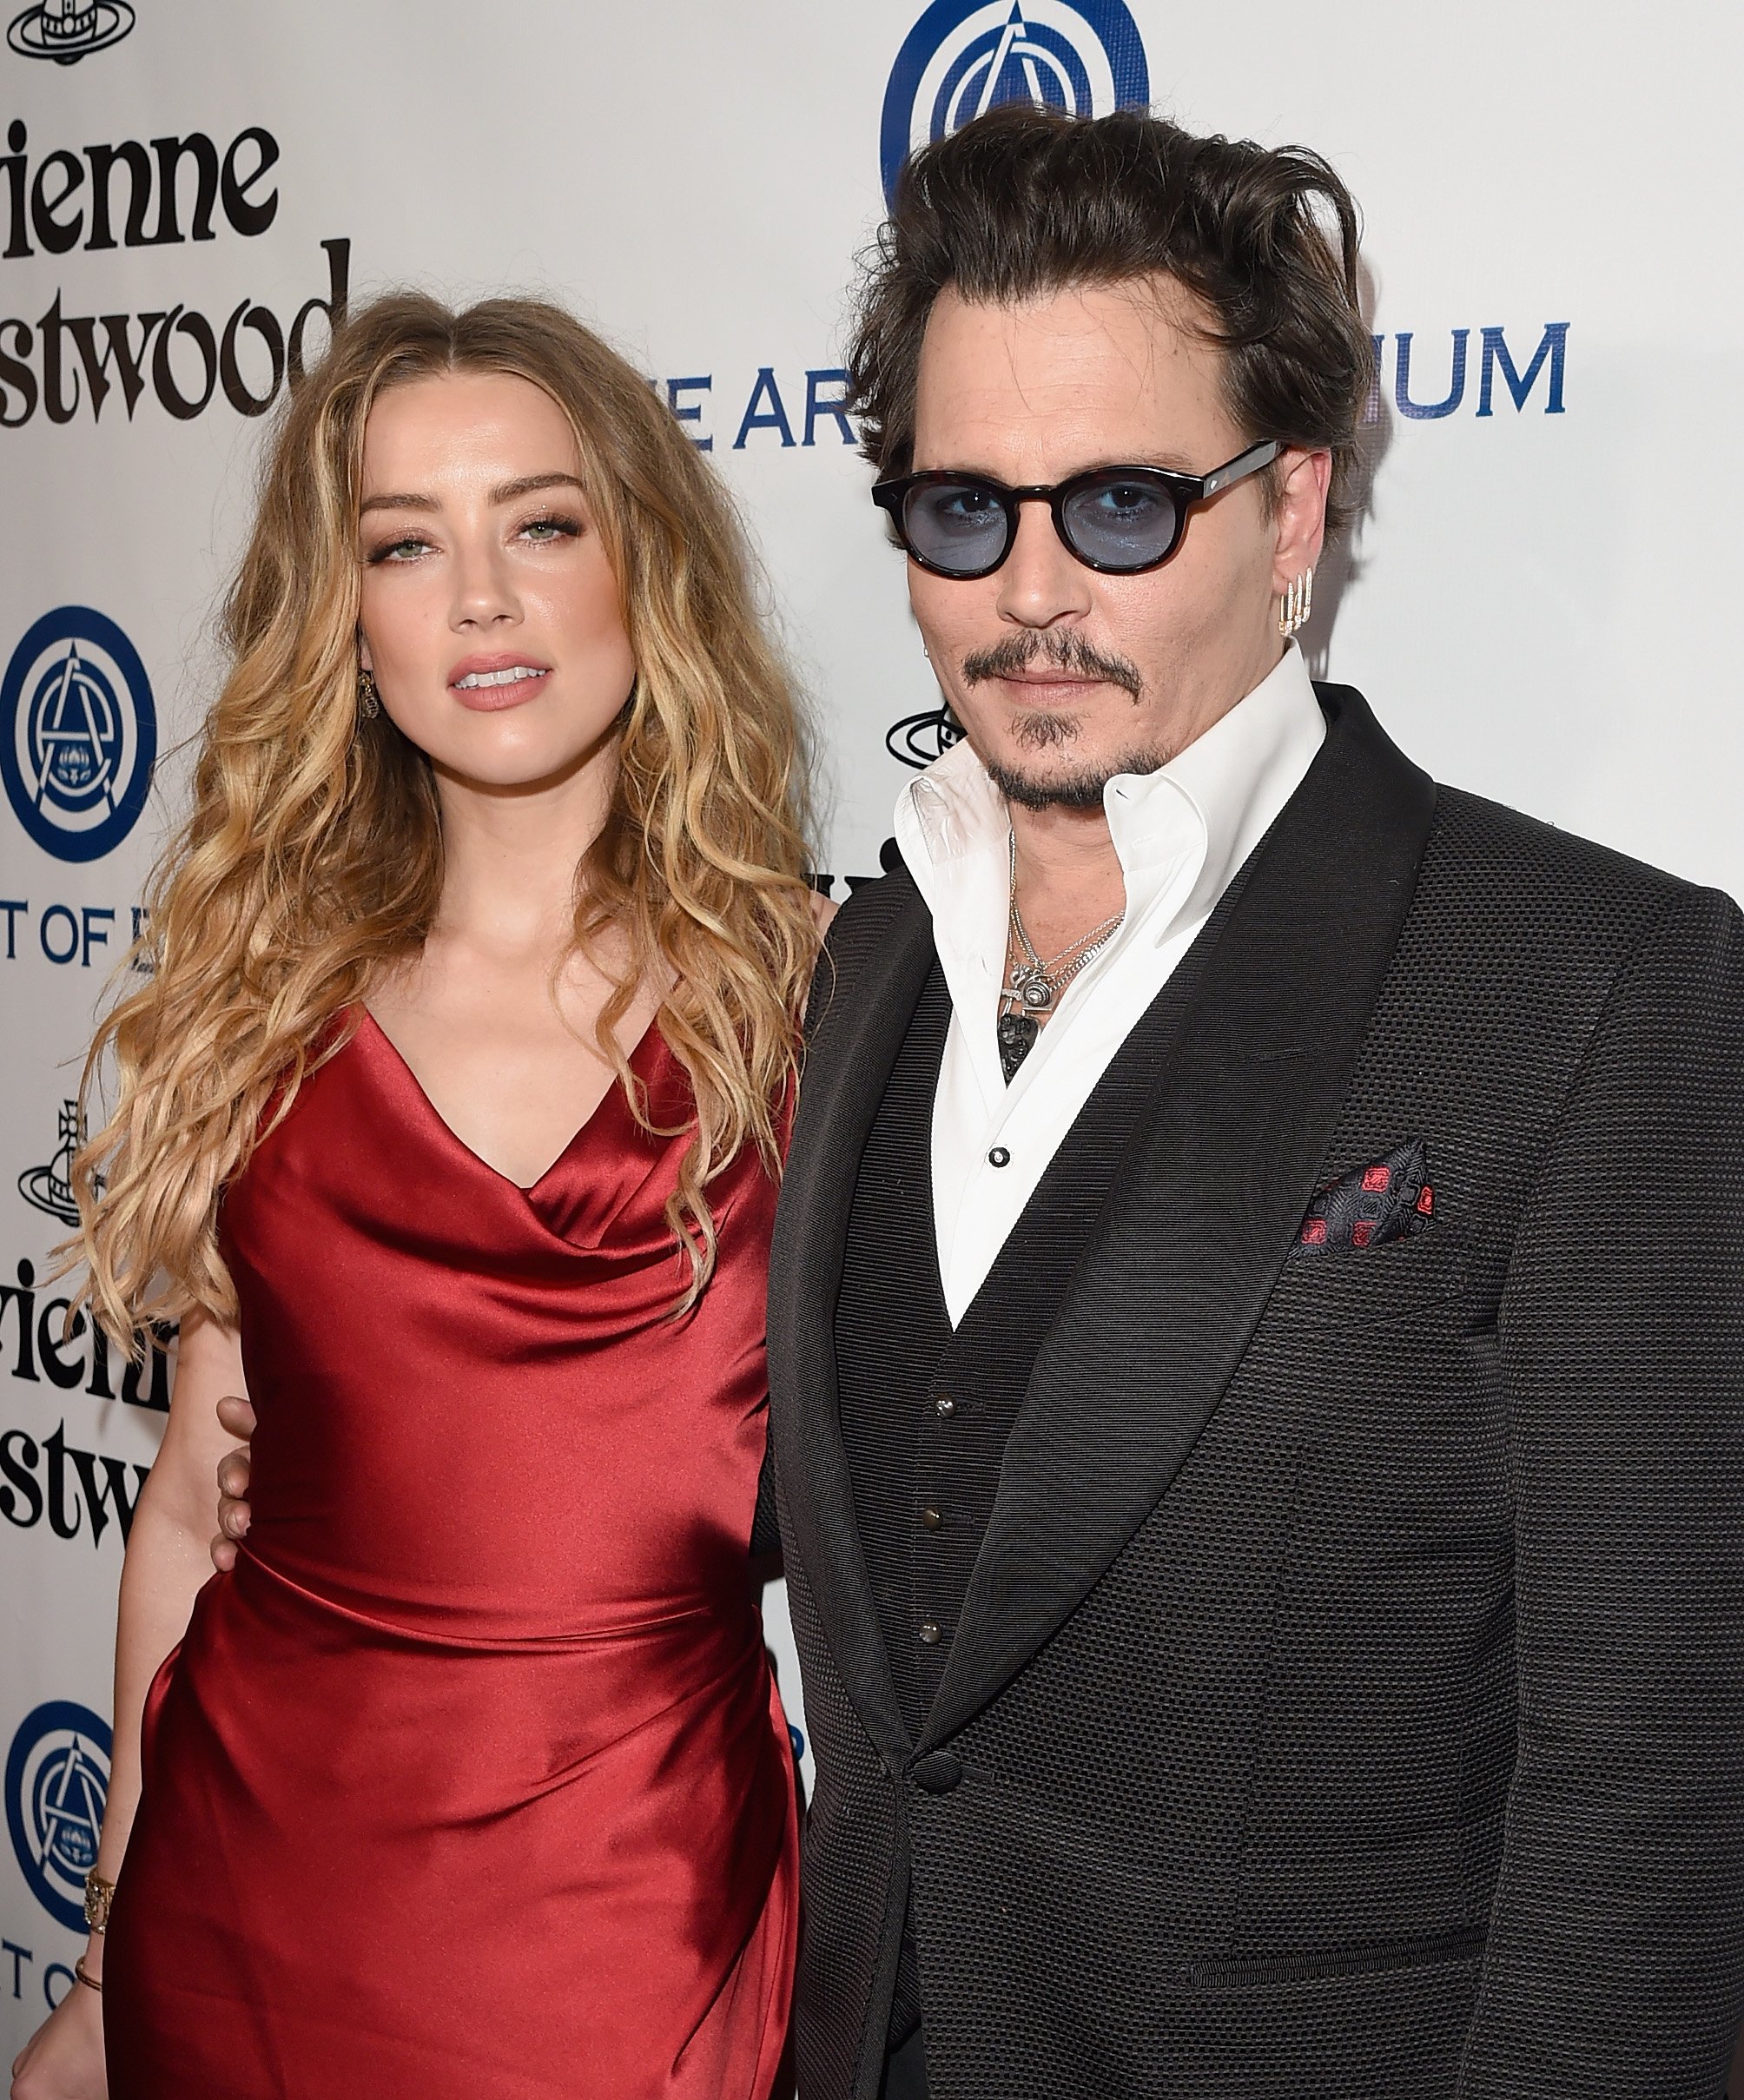 Amber Heard and Johnny Depp at The Art of Elysium Heaven Gala on January 9, 2016, in Culver City, California. | Source: Jason Merritt/Getty Images